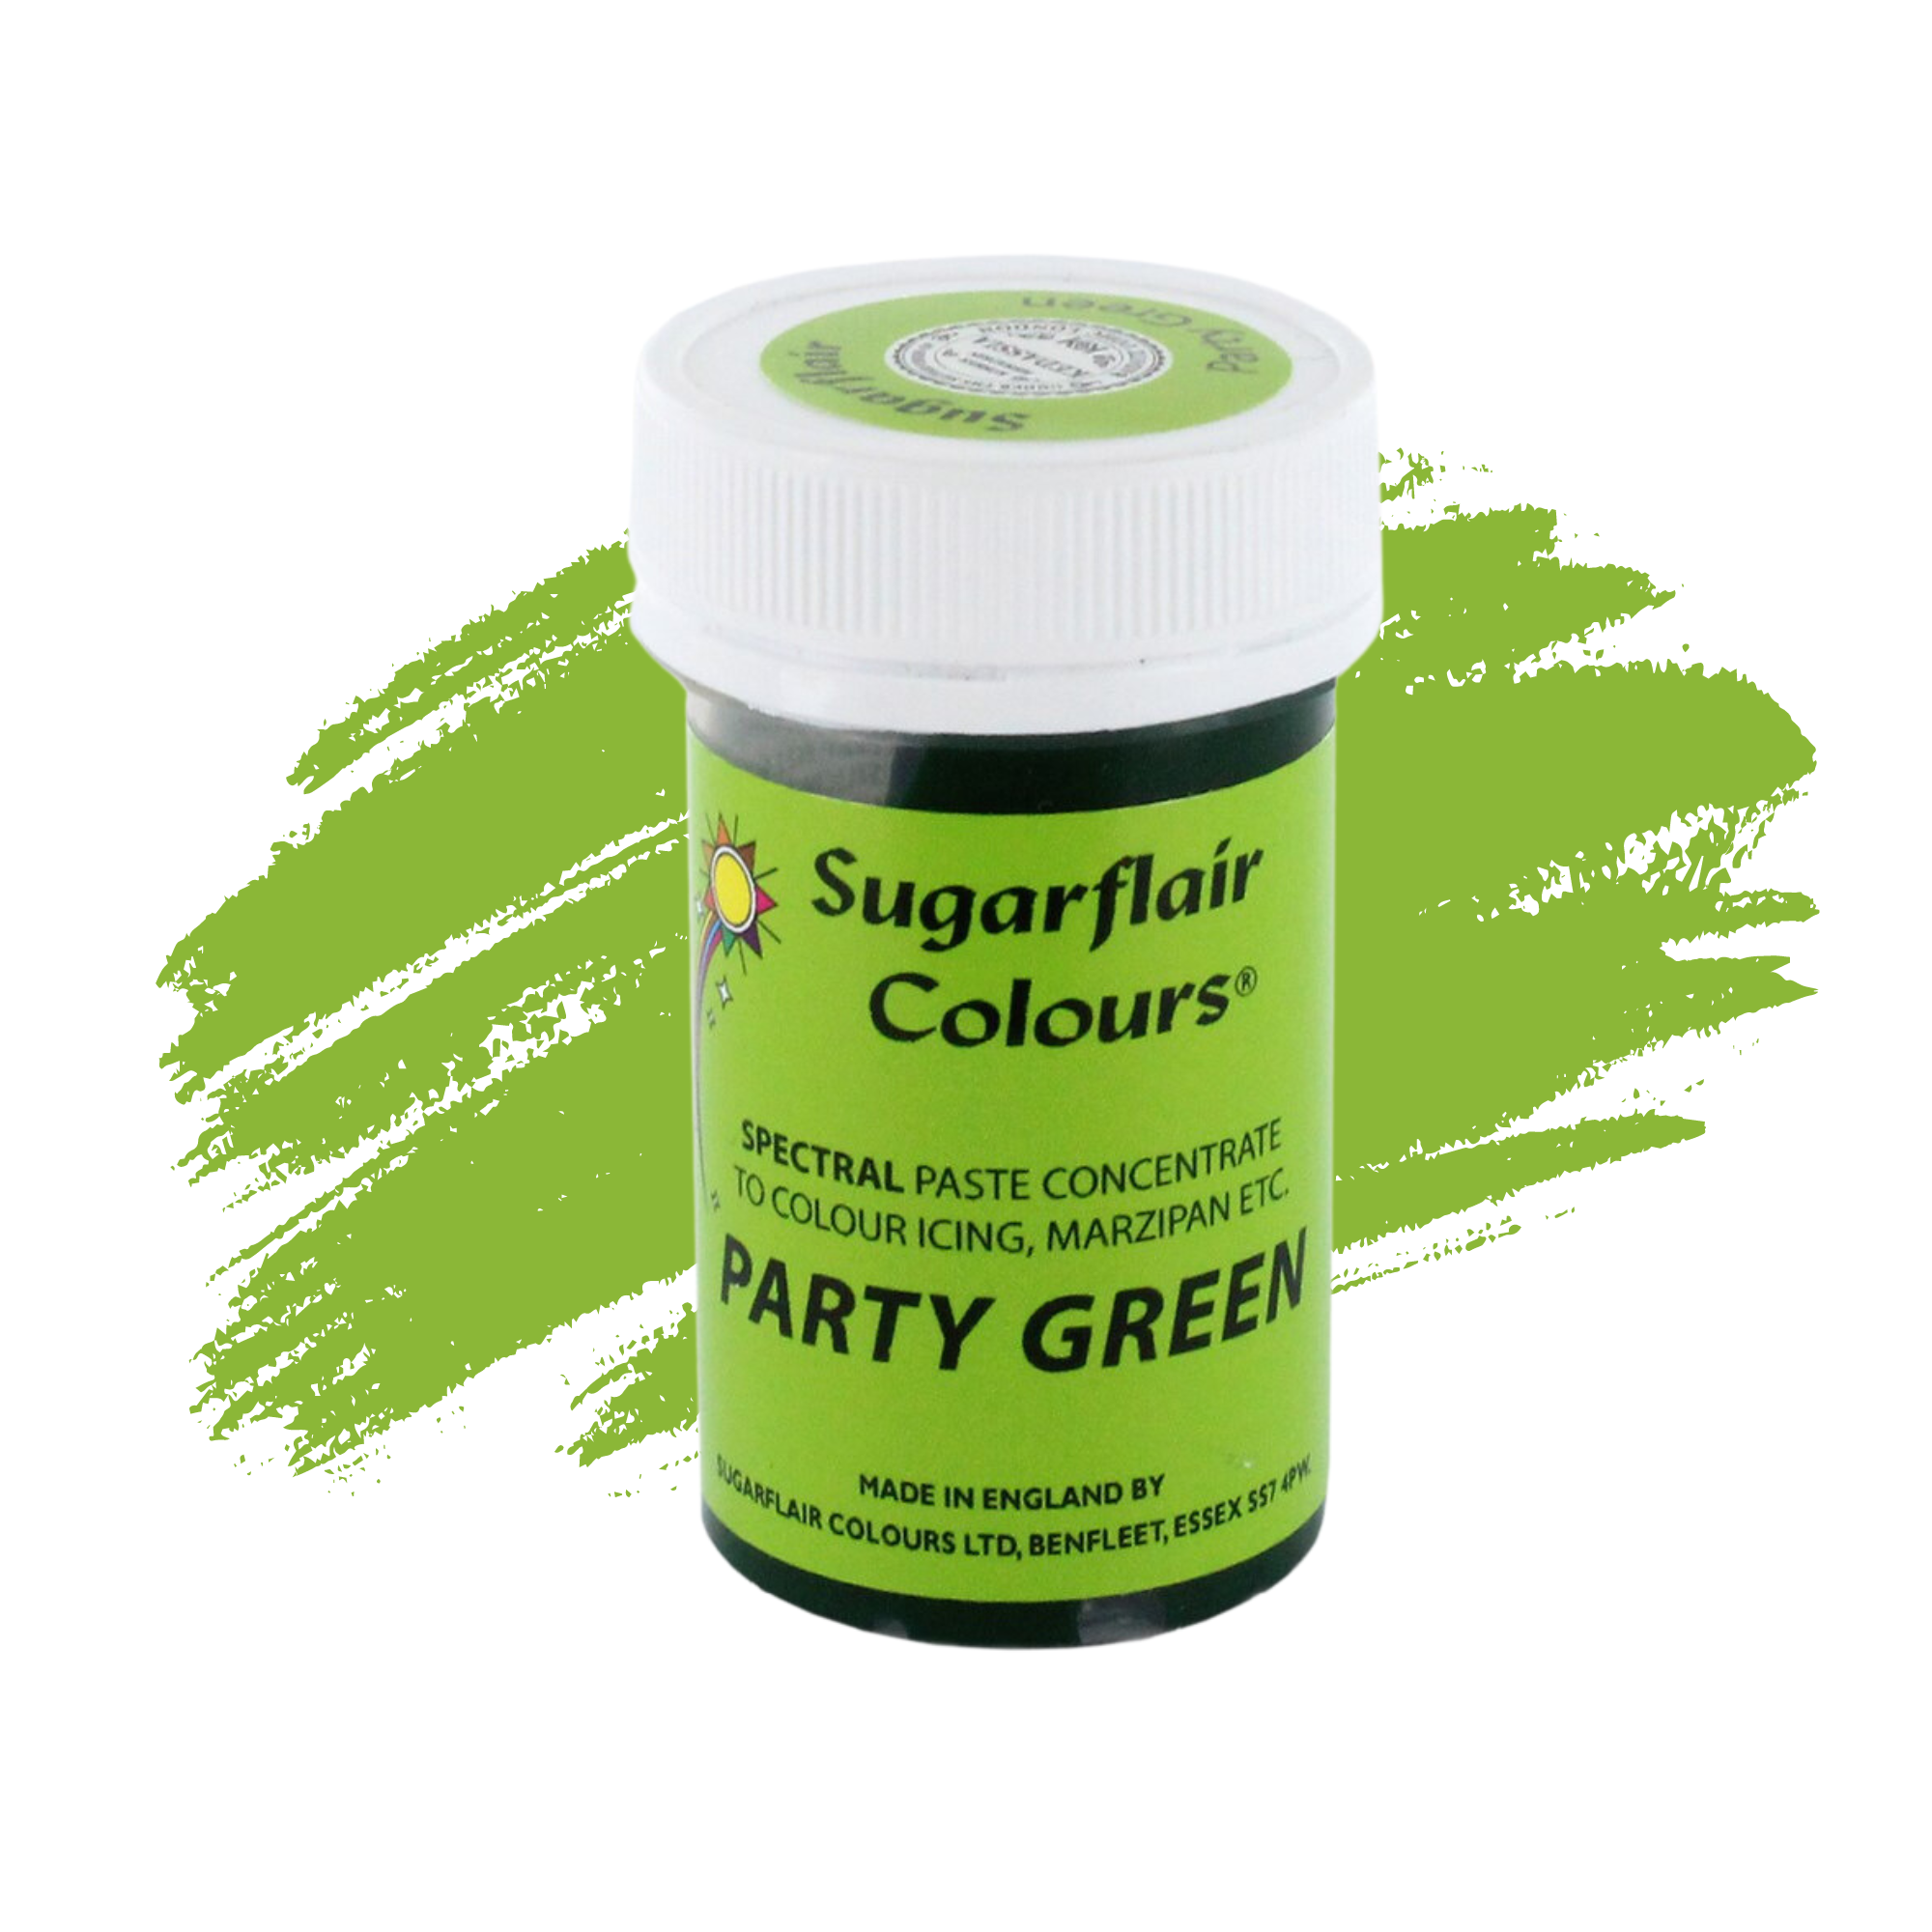 Sugarflair Paste Colours Concentrated Food Colouring - Spectral Party Green - 25g